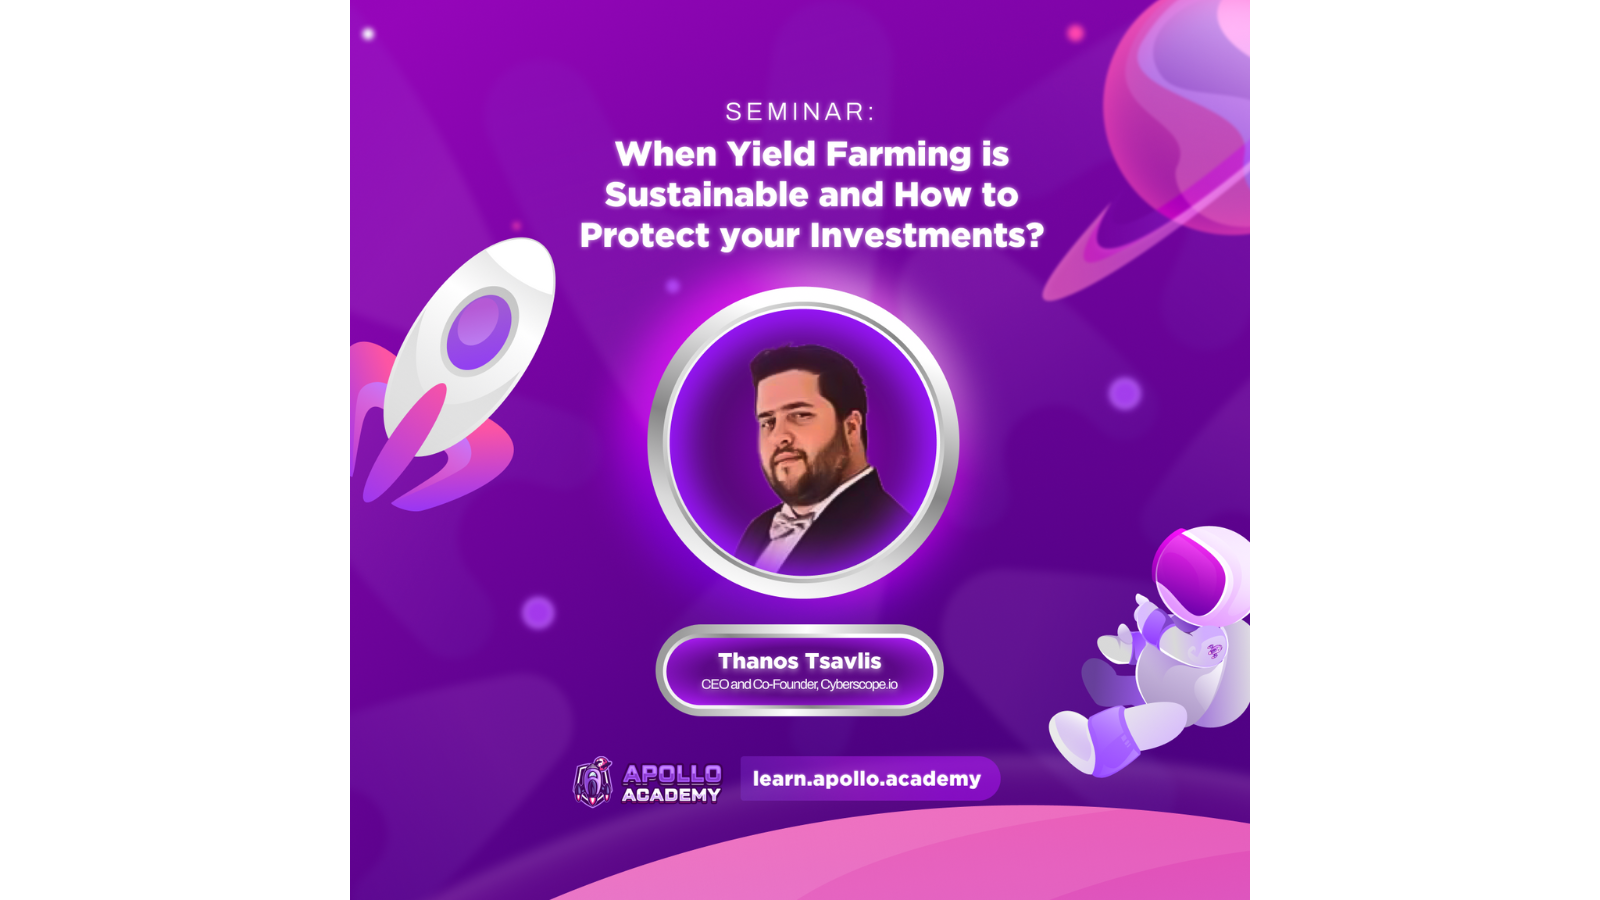 Sustainable Yield Farming and Protecting Your Investments: A Guest Seminar at A² Academy